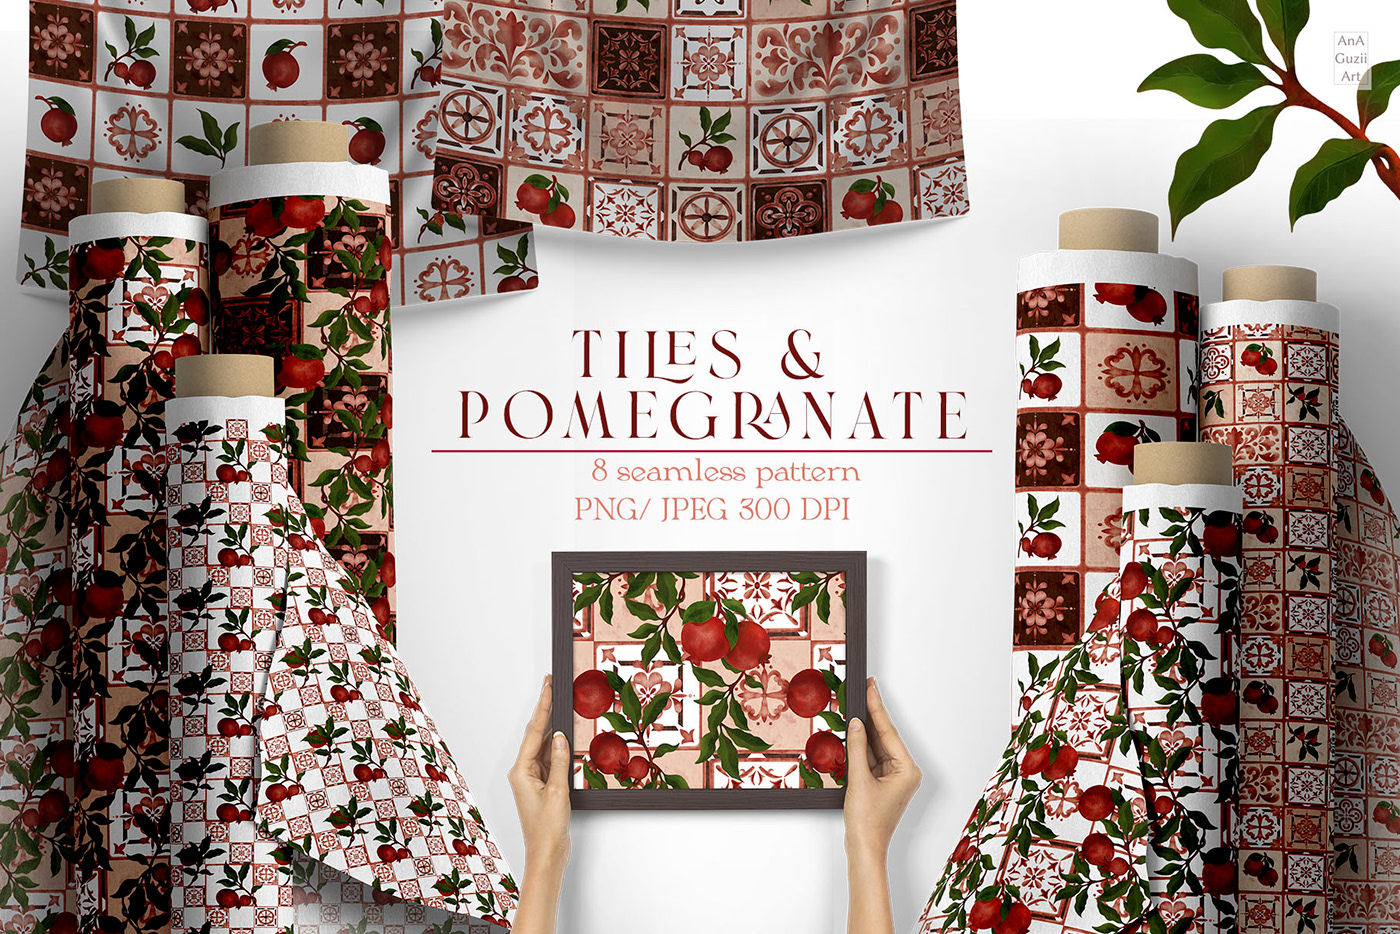 Seamless Pattern and clipart "Tiles and pomegranates" in terracotta, beige and burgundy colors